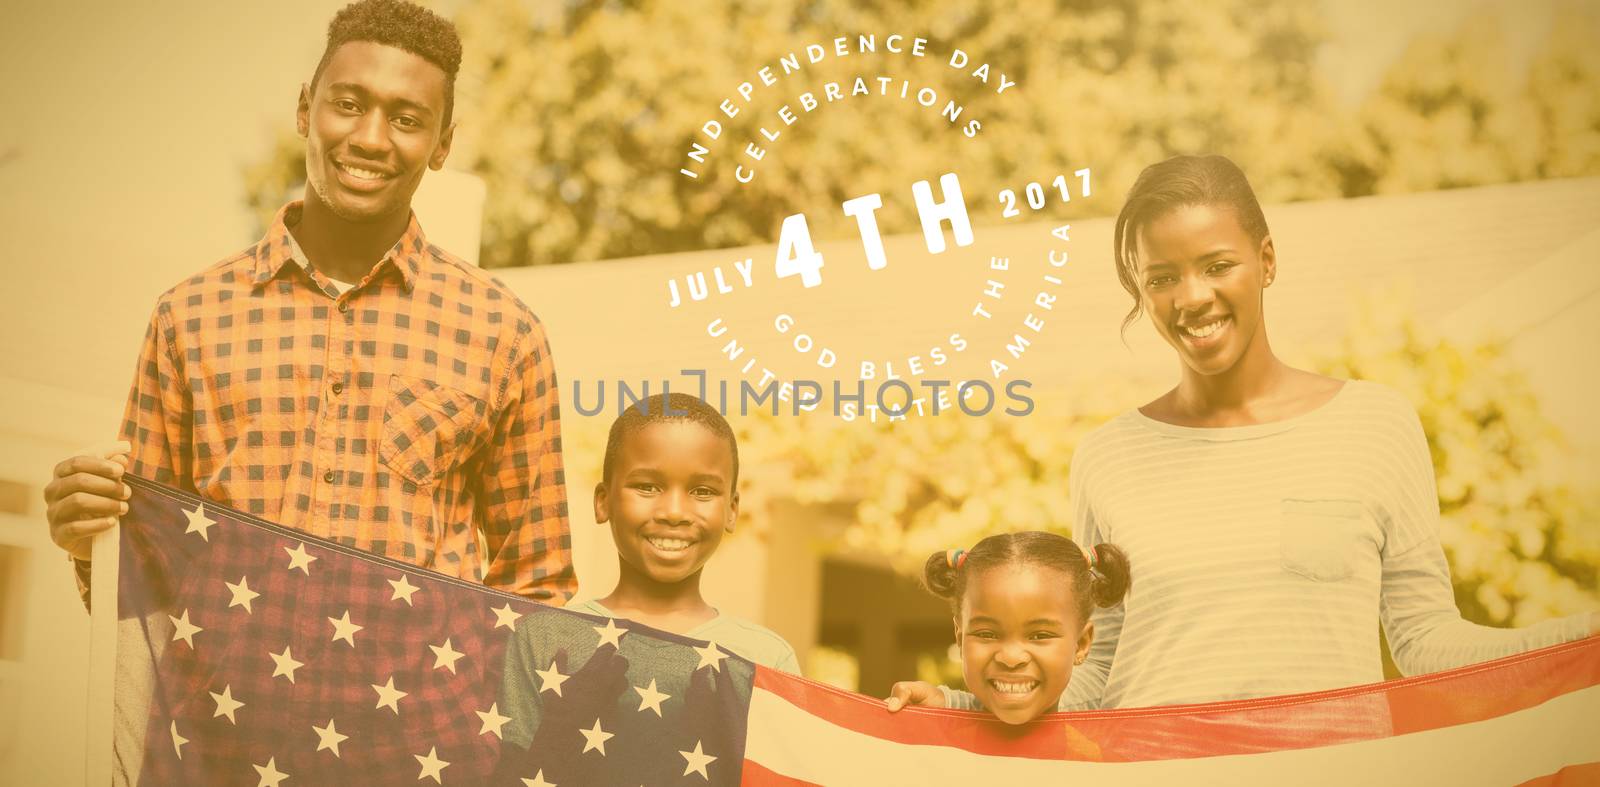 Multi colored happy 4th of july text against white background against portrait of happy family holding american flag on sunny day 